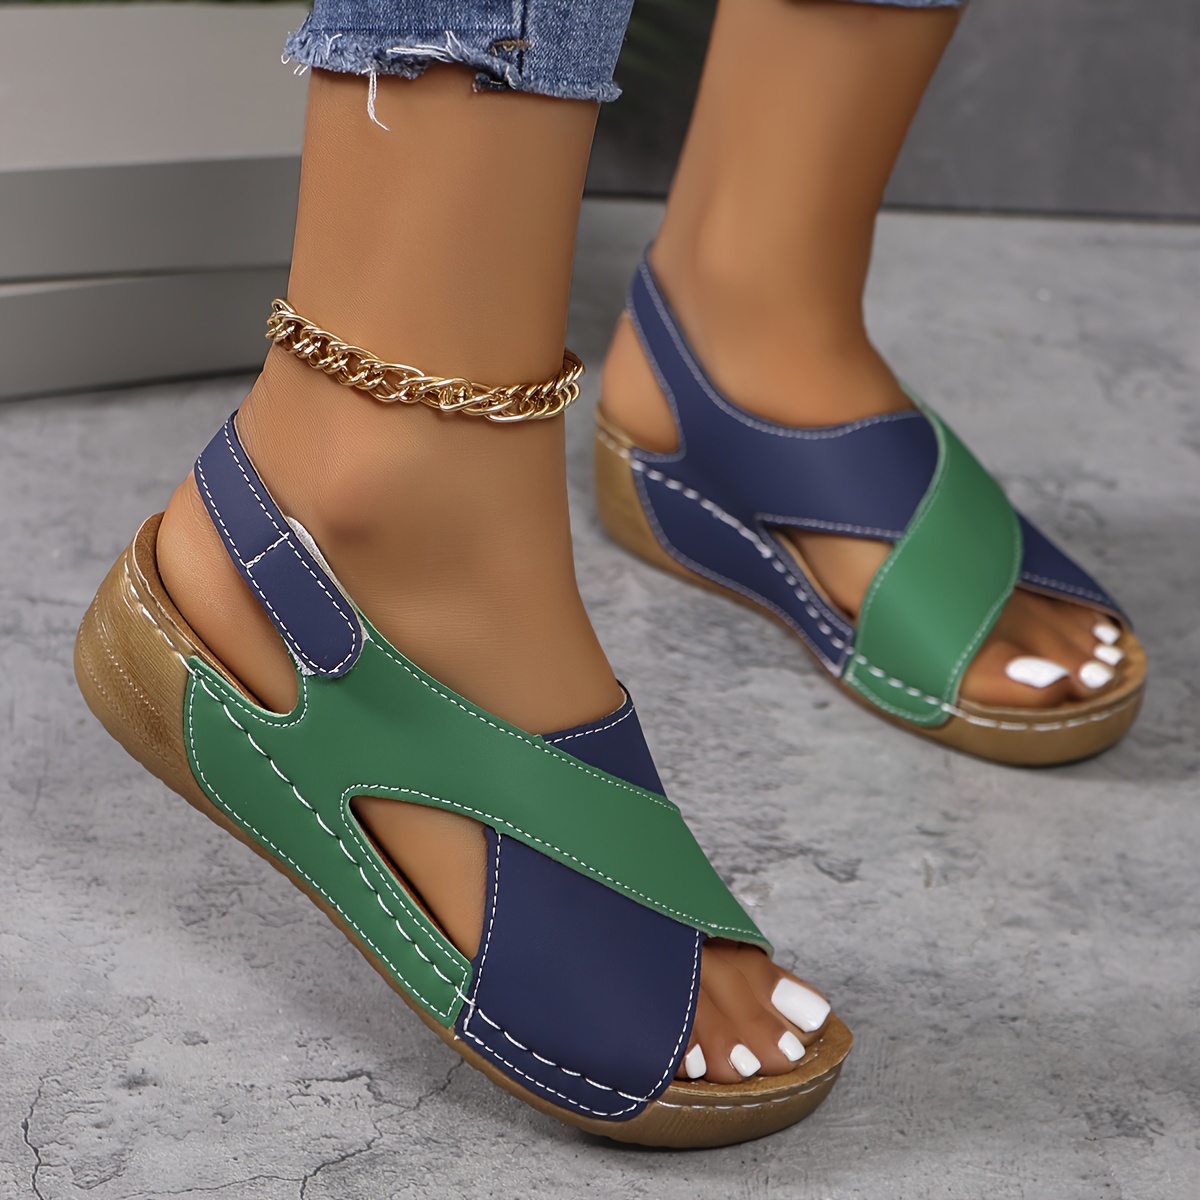 

Women's Colorblock Wedge Heeled Sandals, Casual Open Toe Platform Shoes, Comfortable Ankle Strap Sandals